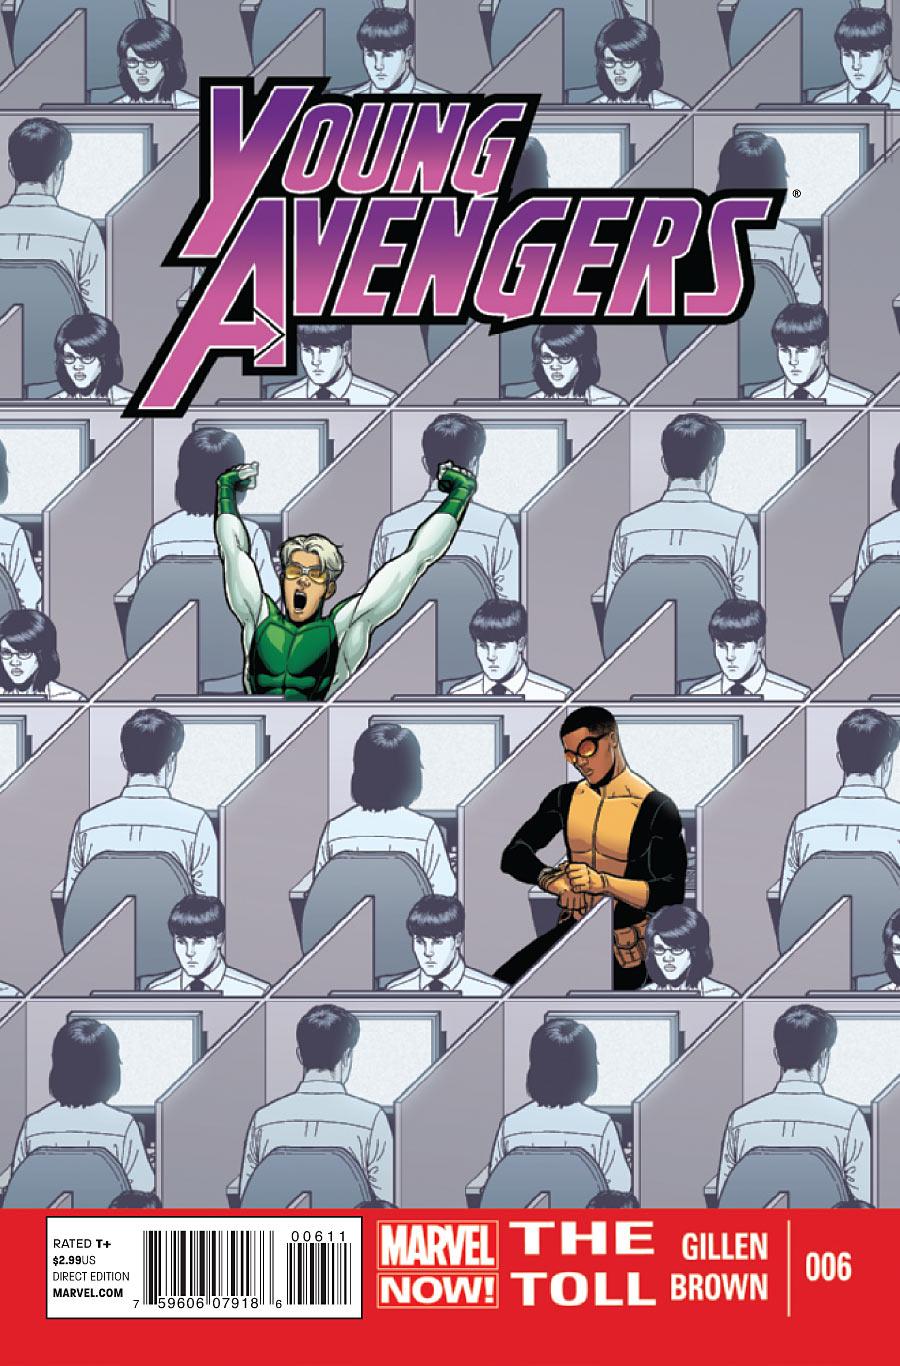 Young Avengers Vol. 2 #6